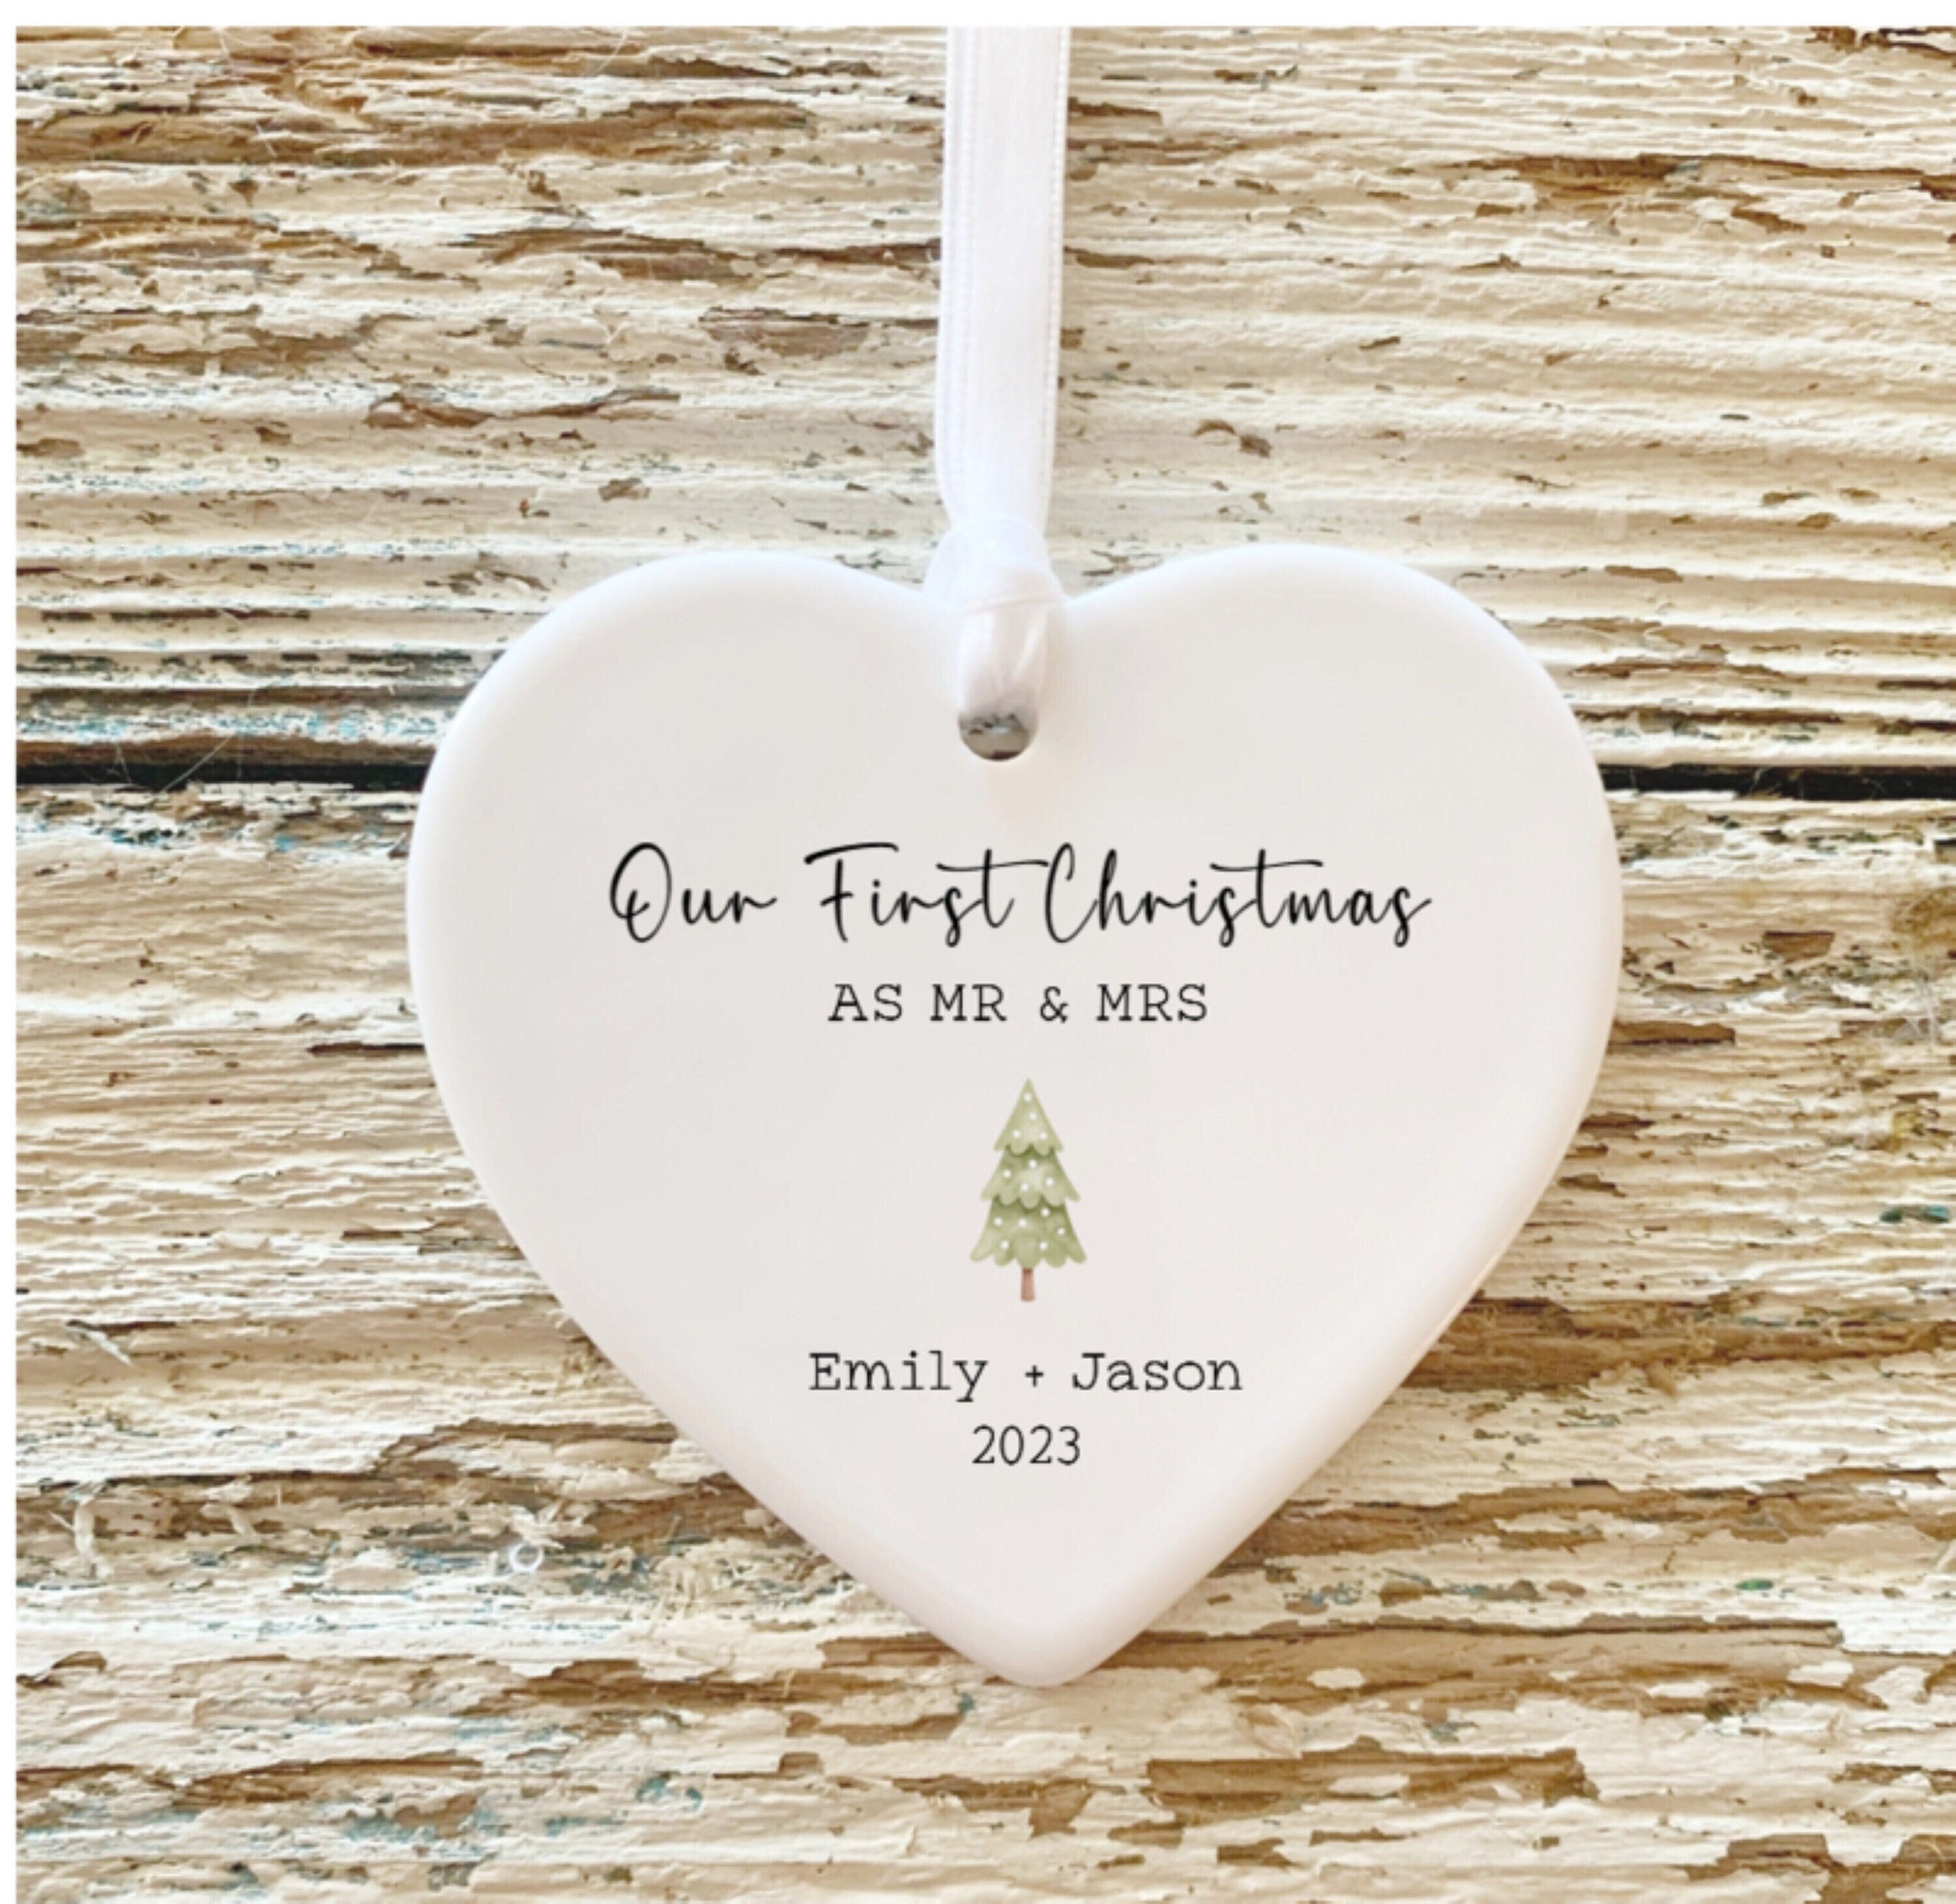 Mr and Mrs Christmas Ornament / Personalized Wedding Gift / First Christmas Married Ornament / Newlywed Gift / Our First Christmas Ornament